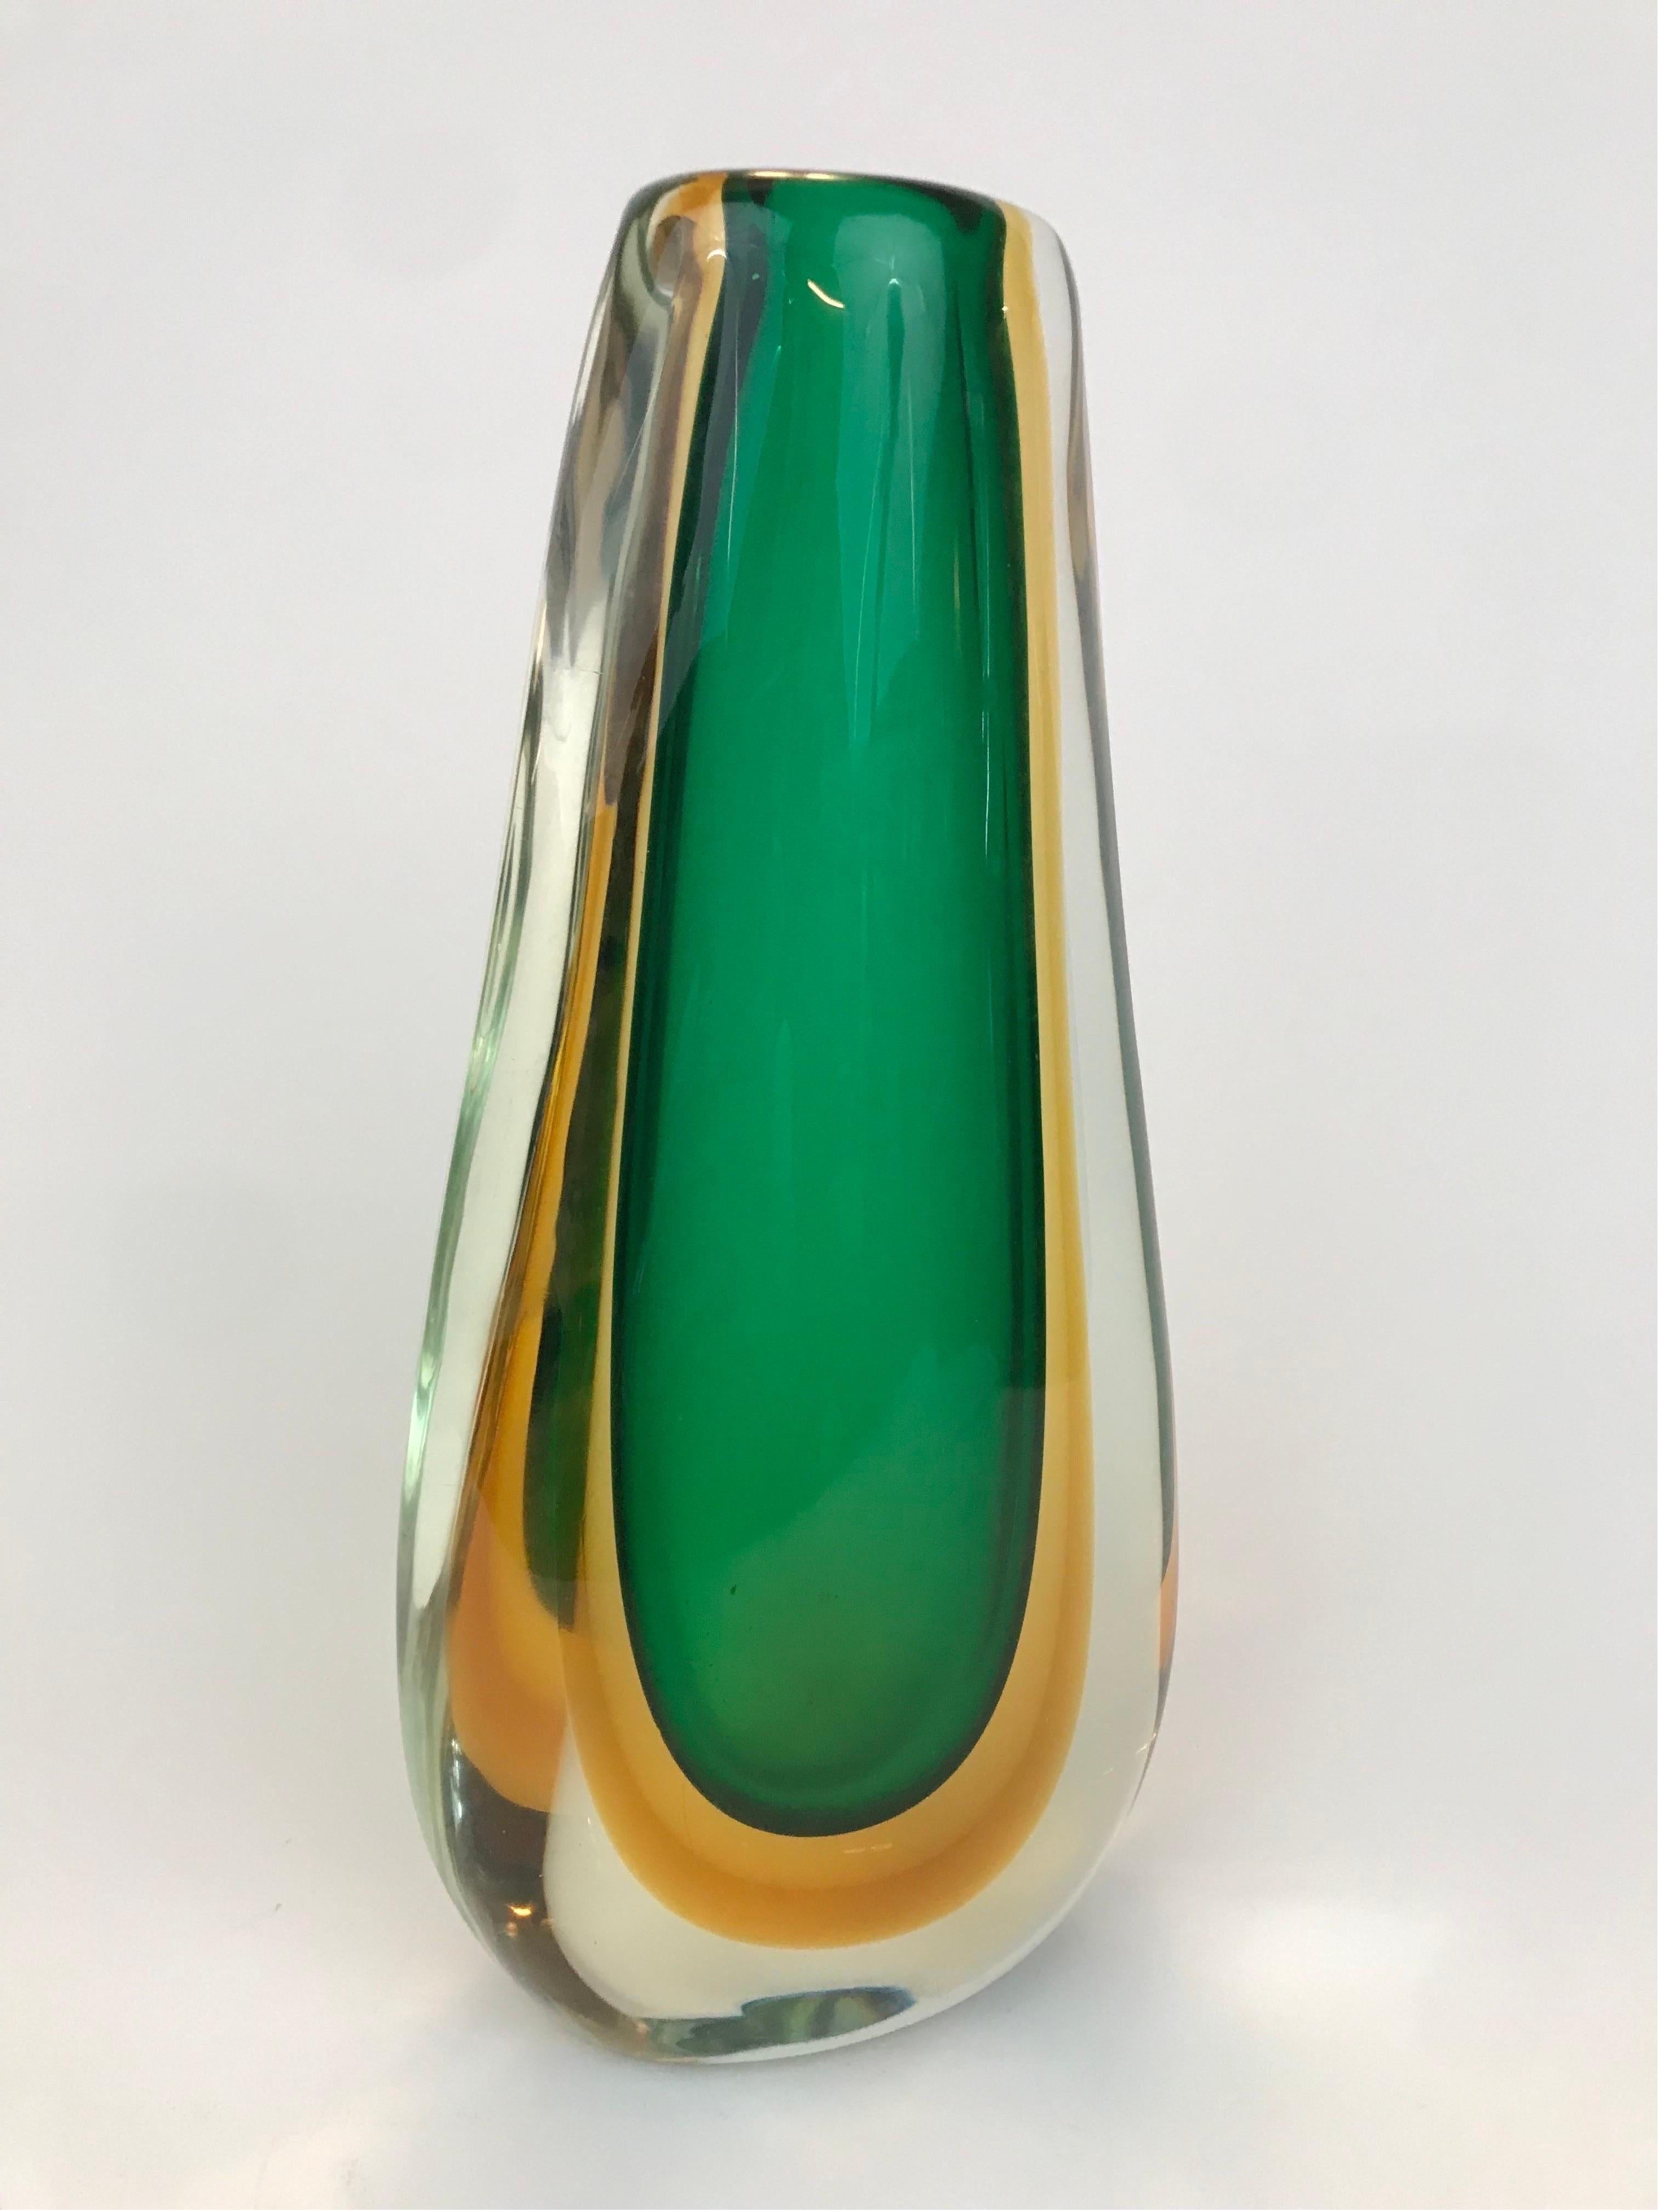 Hand-Crafted Tall Flavio Poli Sommerso Technique Vase in Clear, Amber and Green Glass For Sale